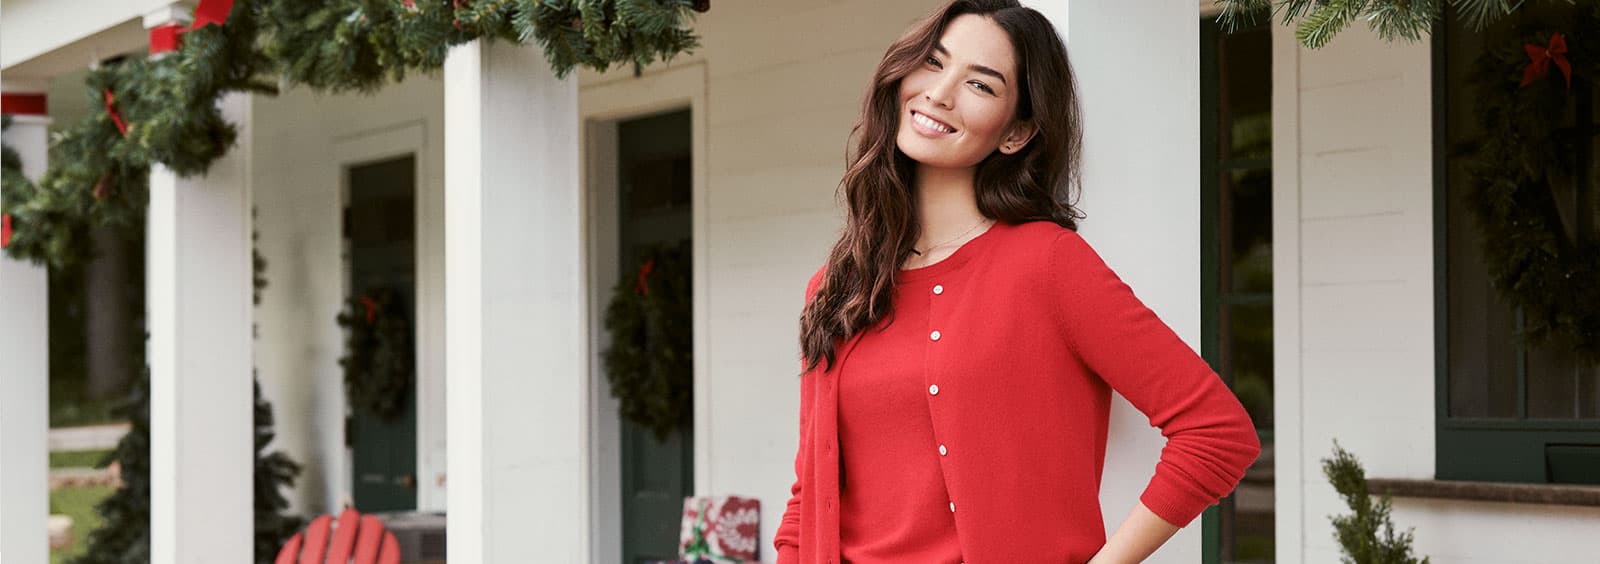 Best Sweaters to Gift This Holiday Season | Lands' End